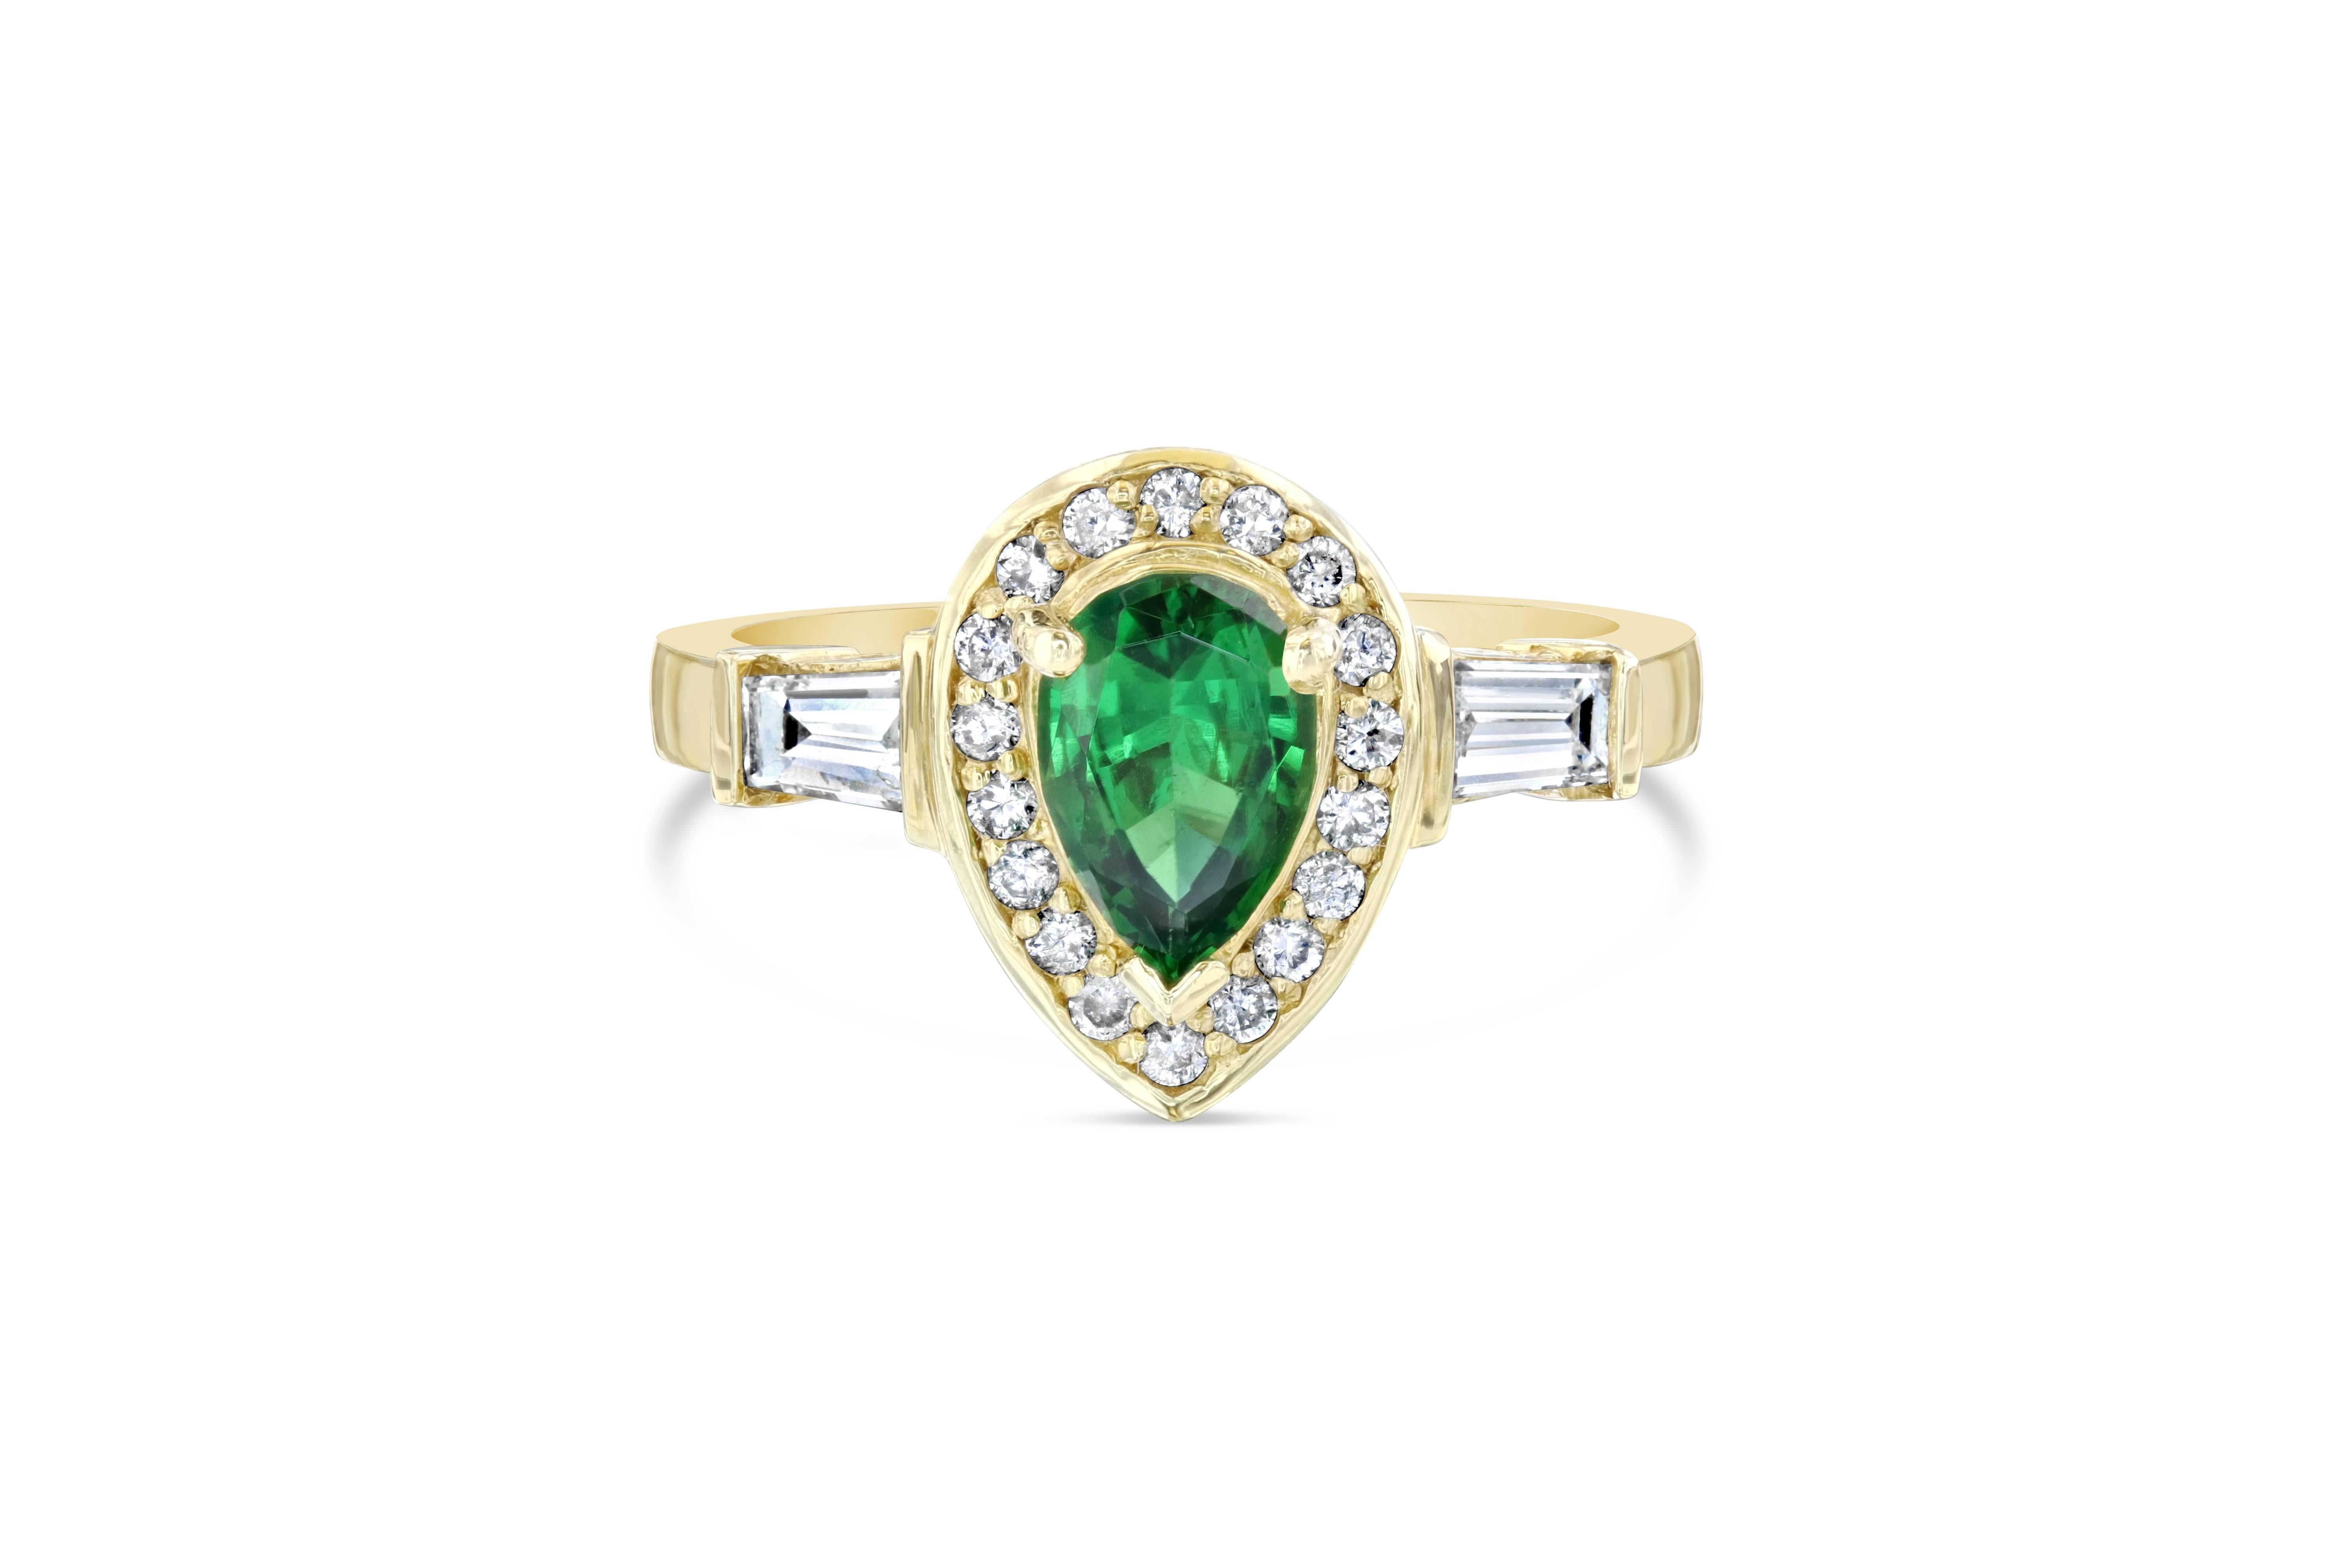 This beautiful ring can easily be a cocktail ring or an engagement ring, either way it is very eye catching! The ring has a Pear Cut Tsavorite which weighs 0.90 carats and is surrounded by a sing halo of 17 Round Cut Diamonds that weighs 0.19 carats